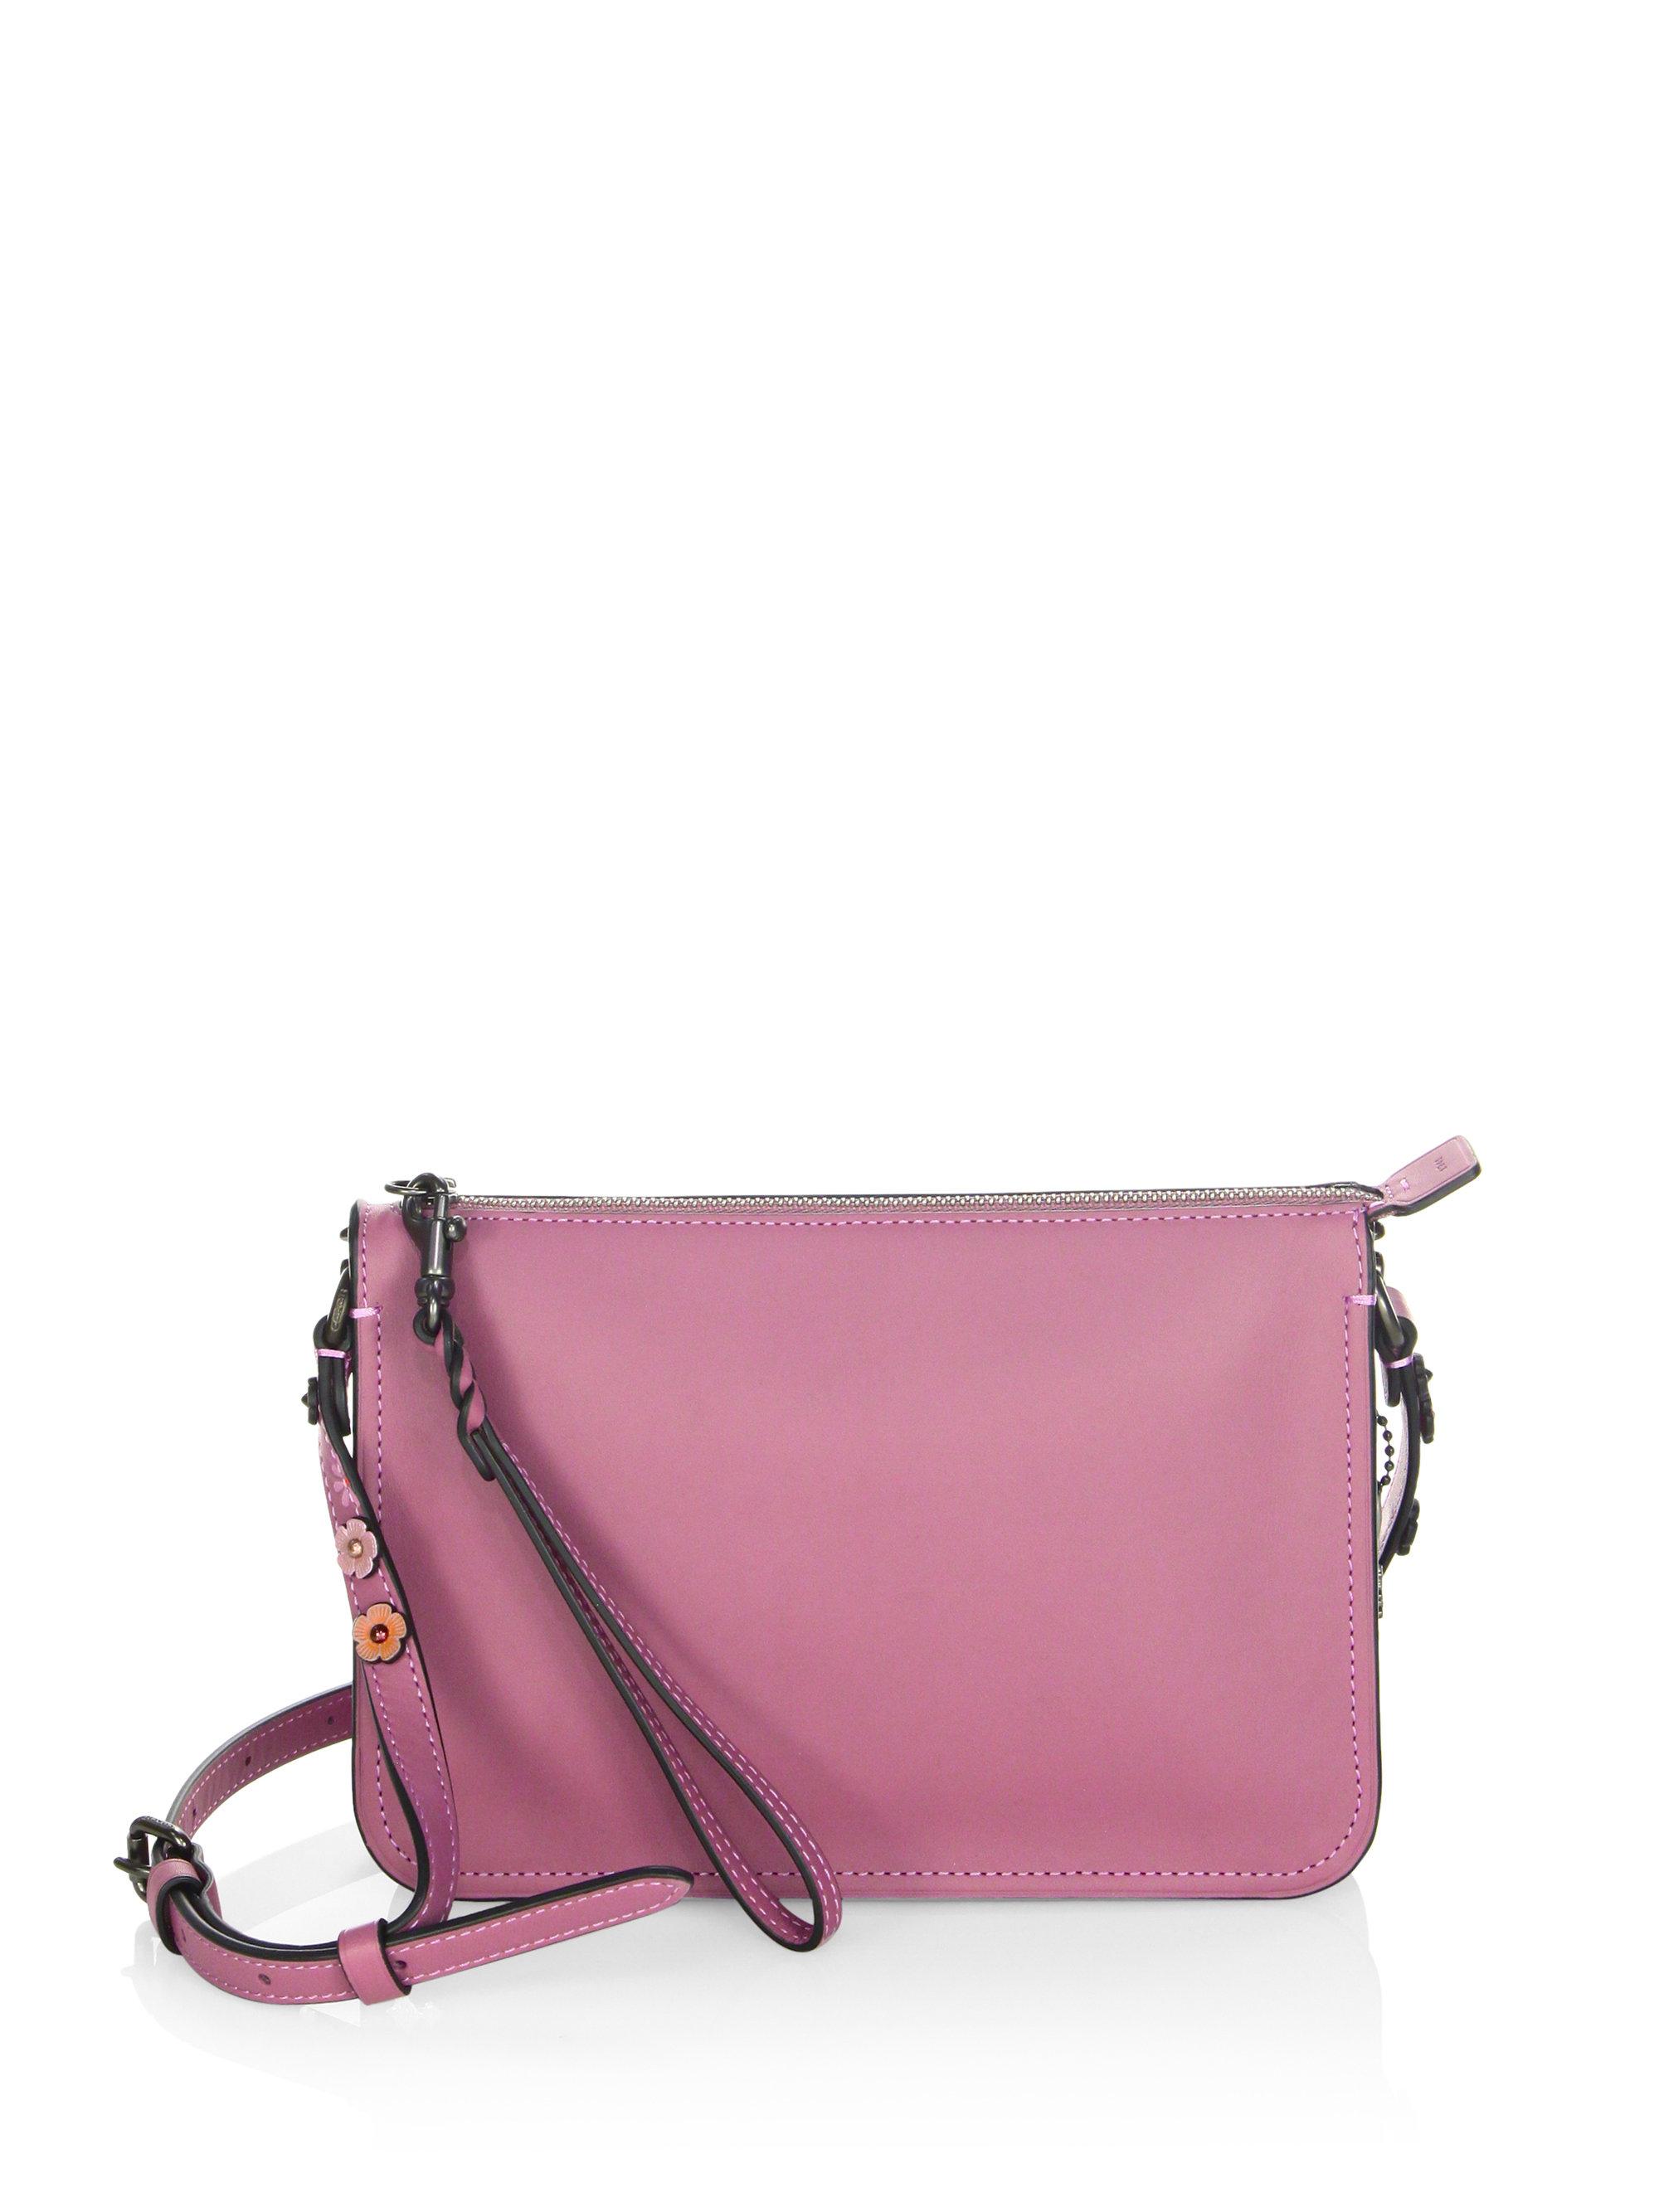 COACH Soho Leather Crossbody Bag in Pink - Lyst